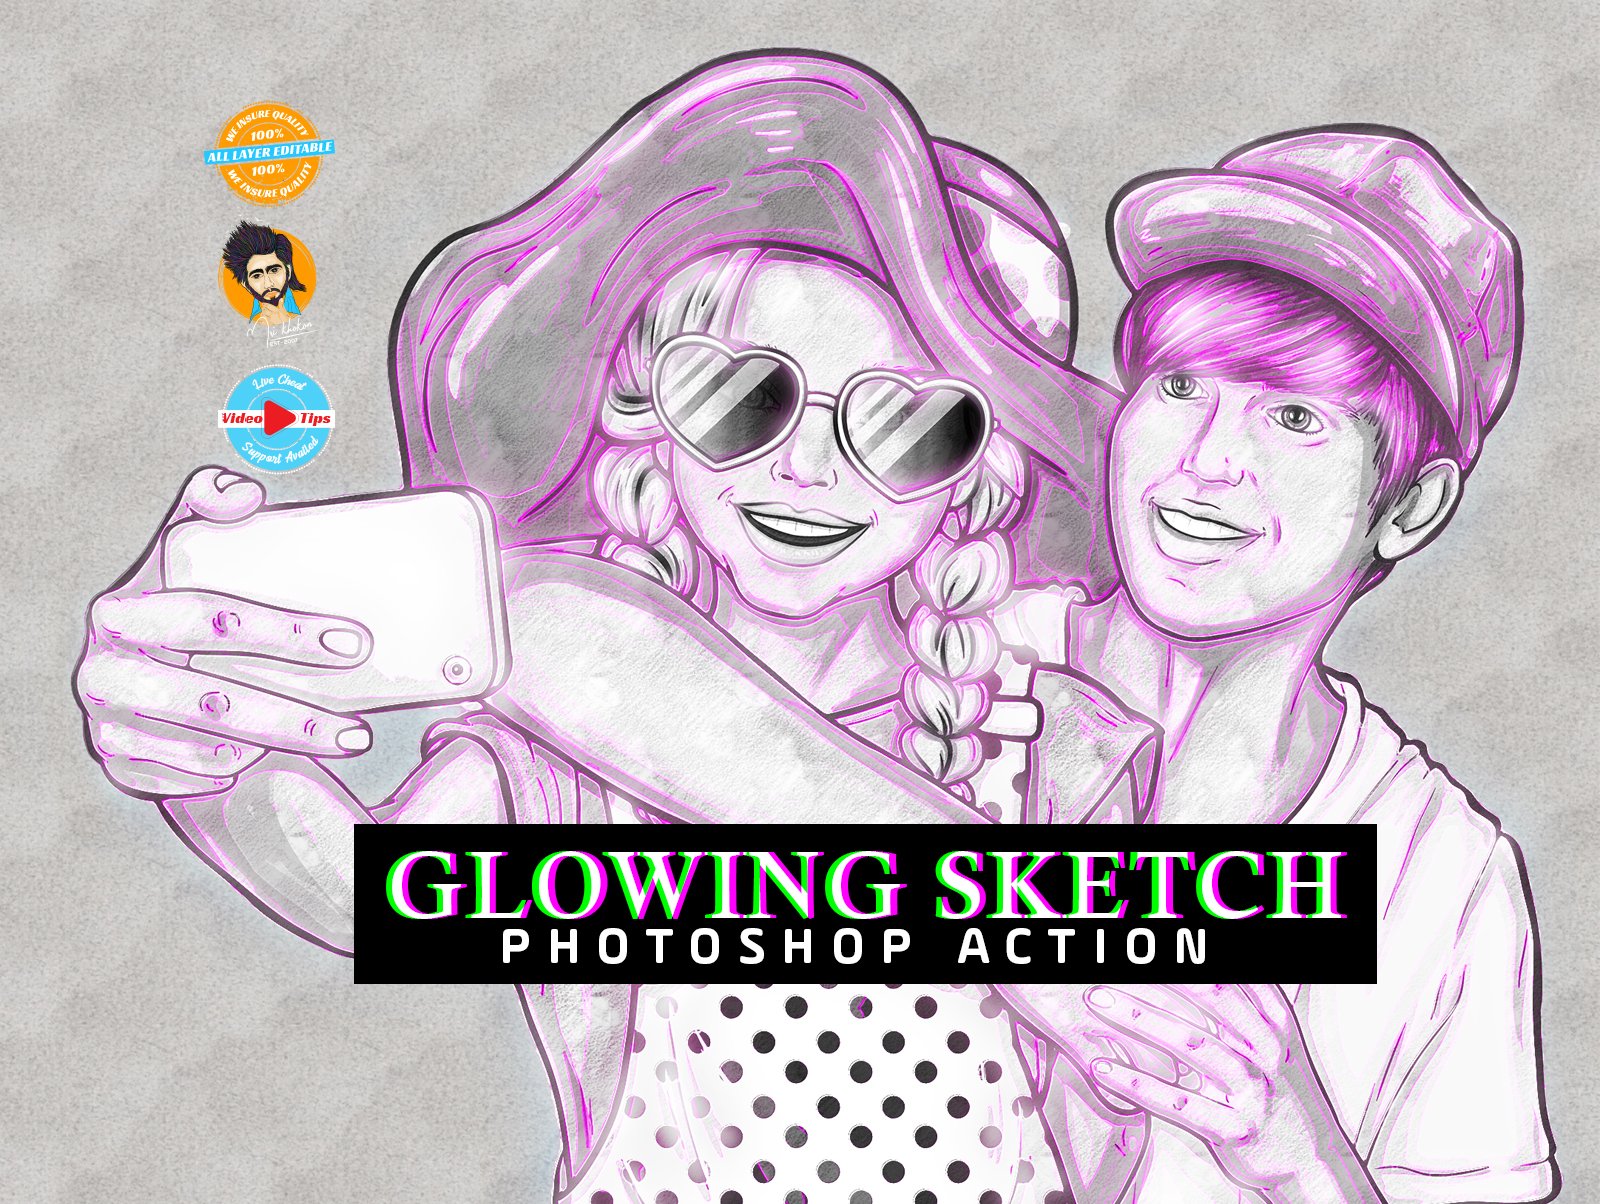 Glowing Sketchpreview image.